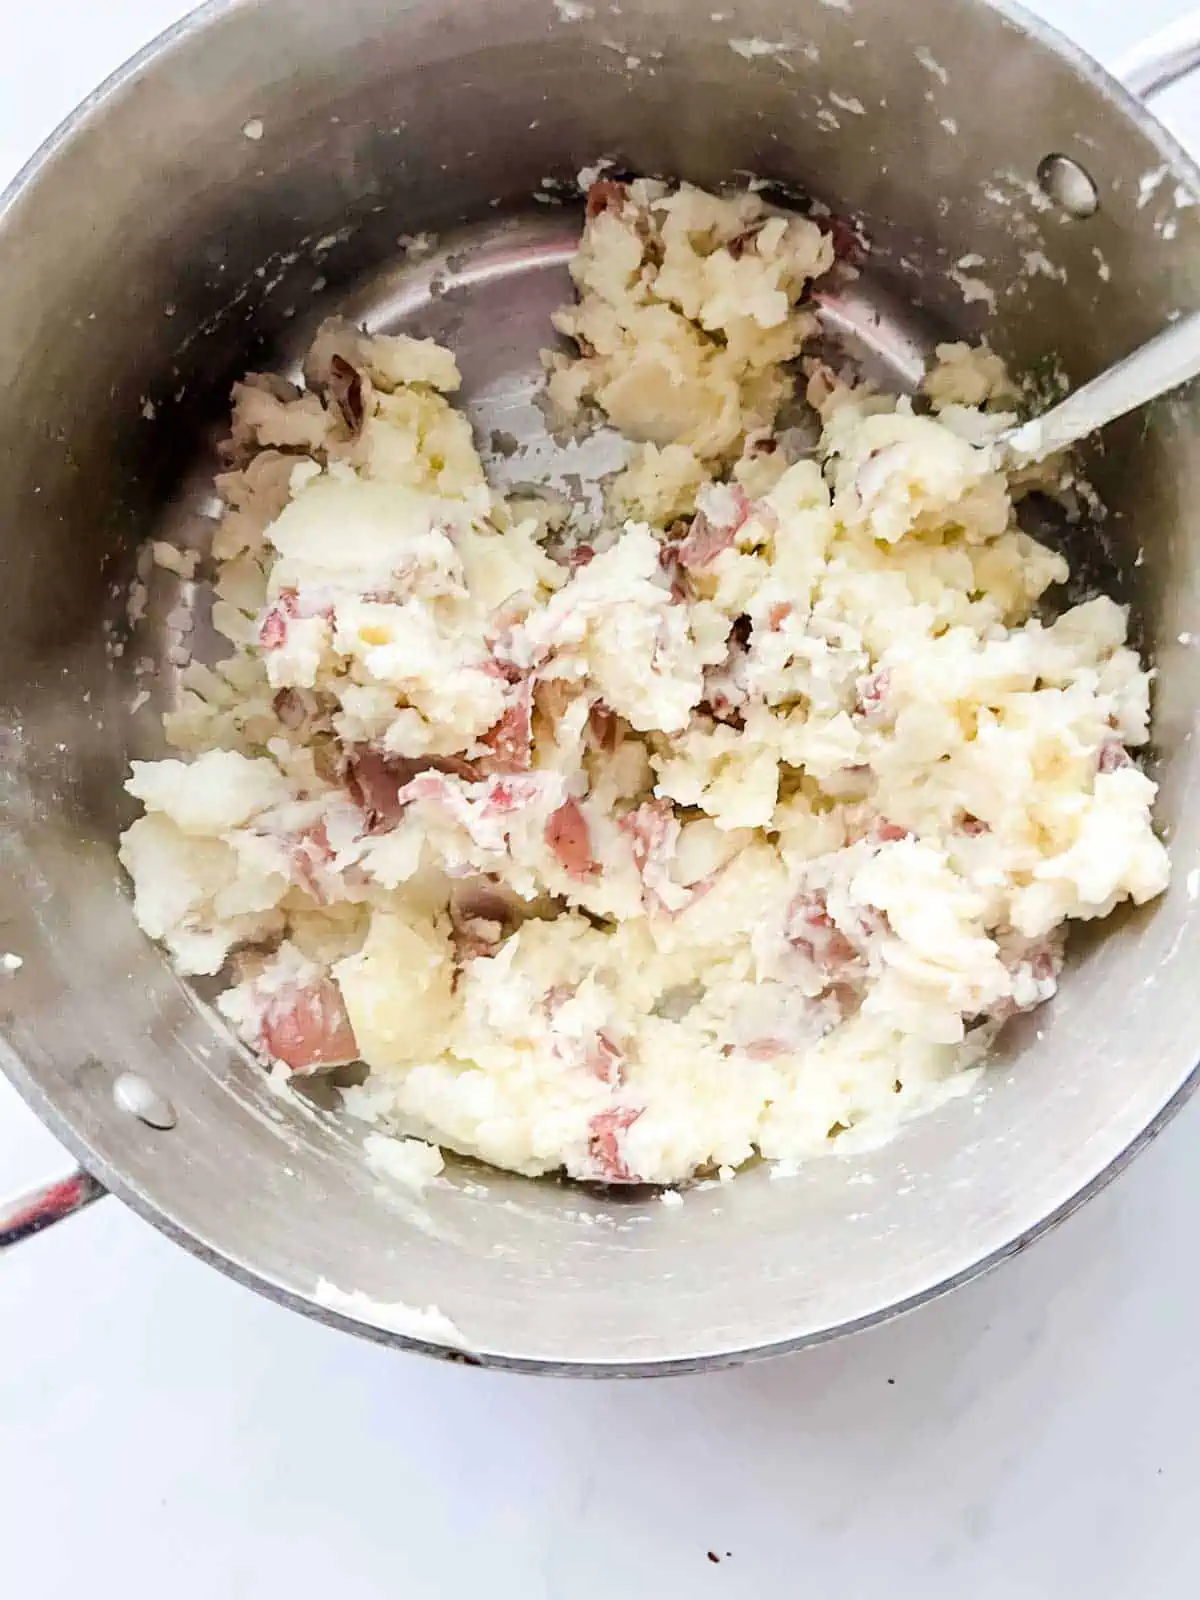 Salt, pepper, and butter being incorporated into mashed potatoes.